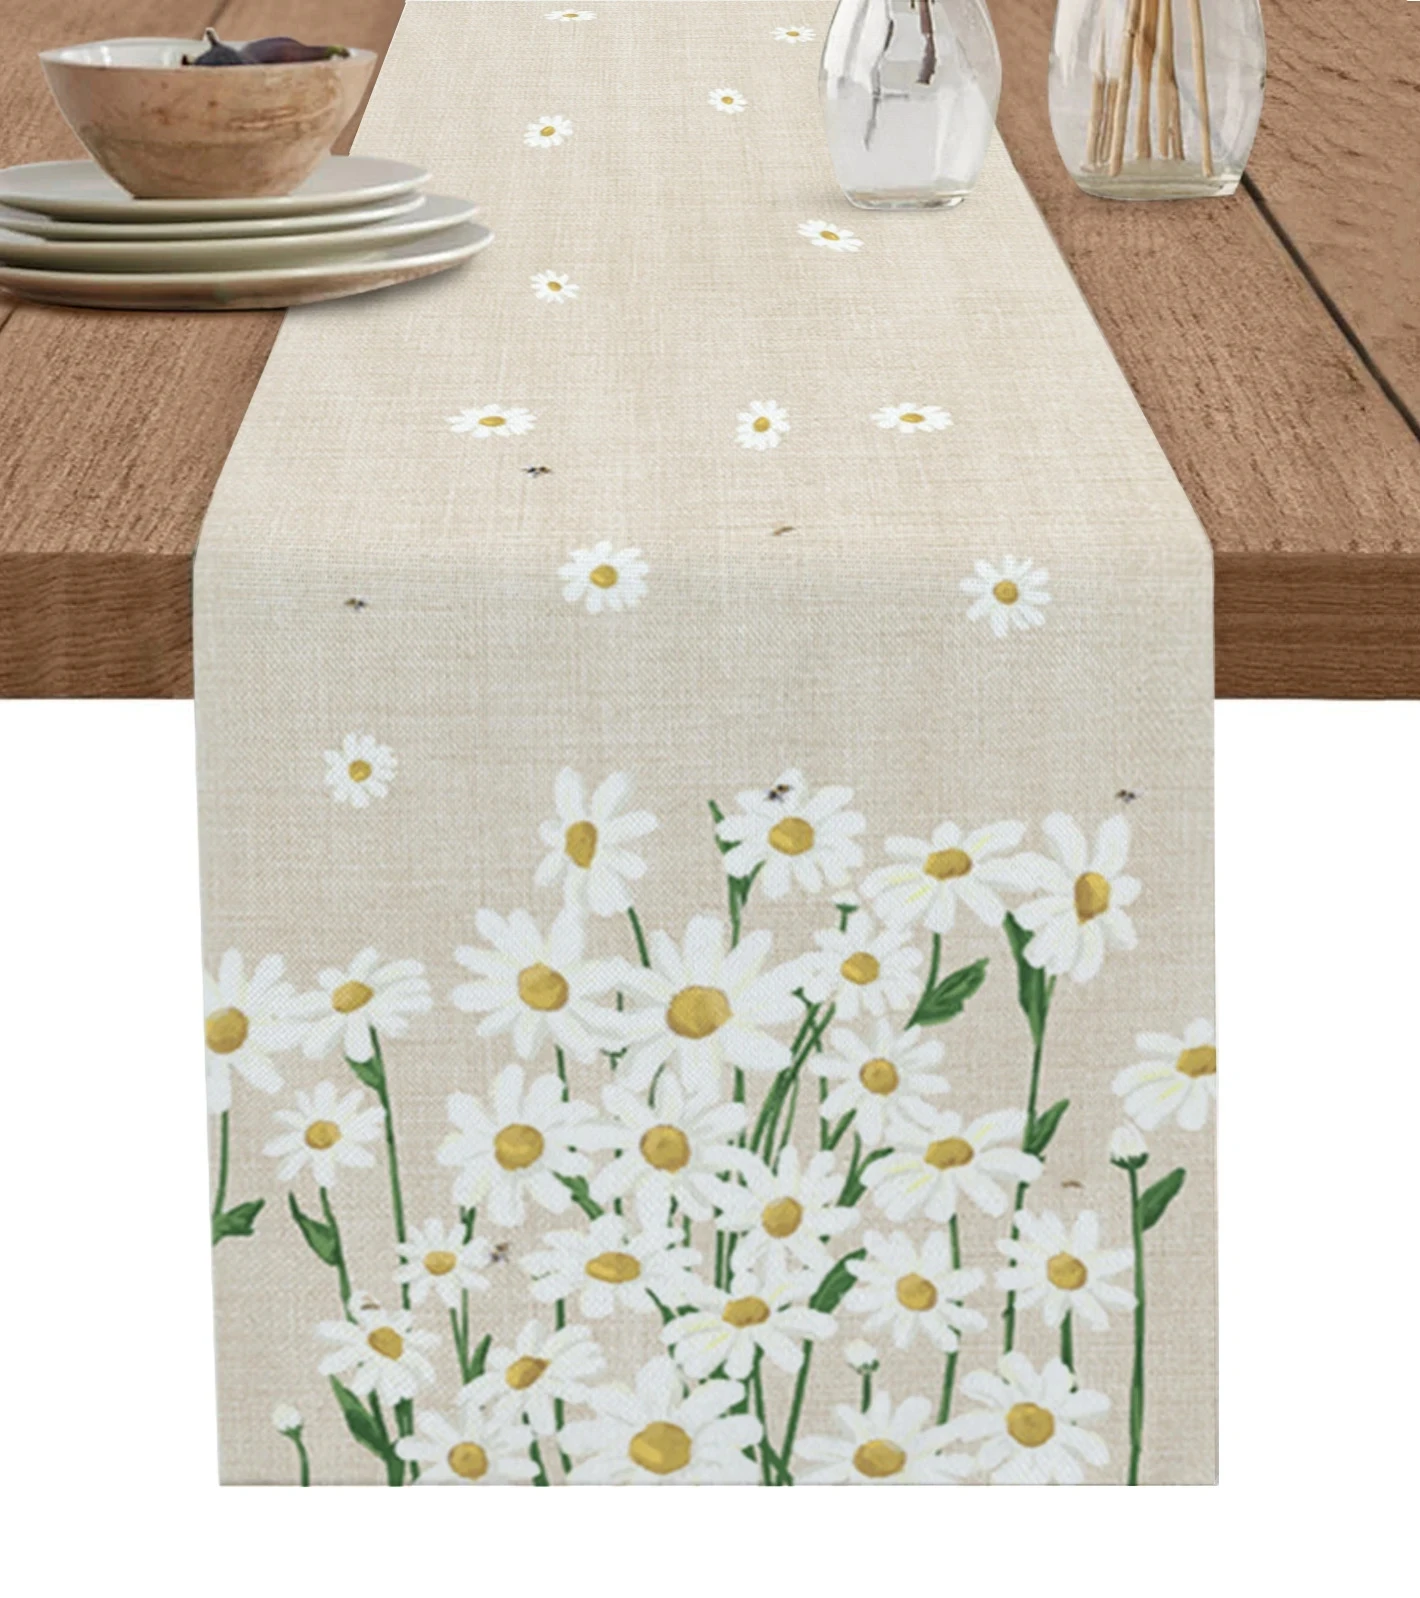 

Dining Decor White Style Kitchen Runner, Rustic Table Table Placemat Wedding Party Runner Home Fresh Daisy Cotton Linen Table